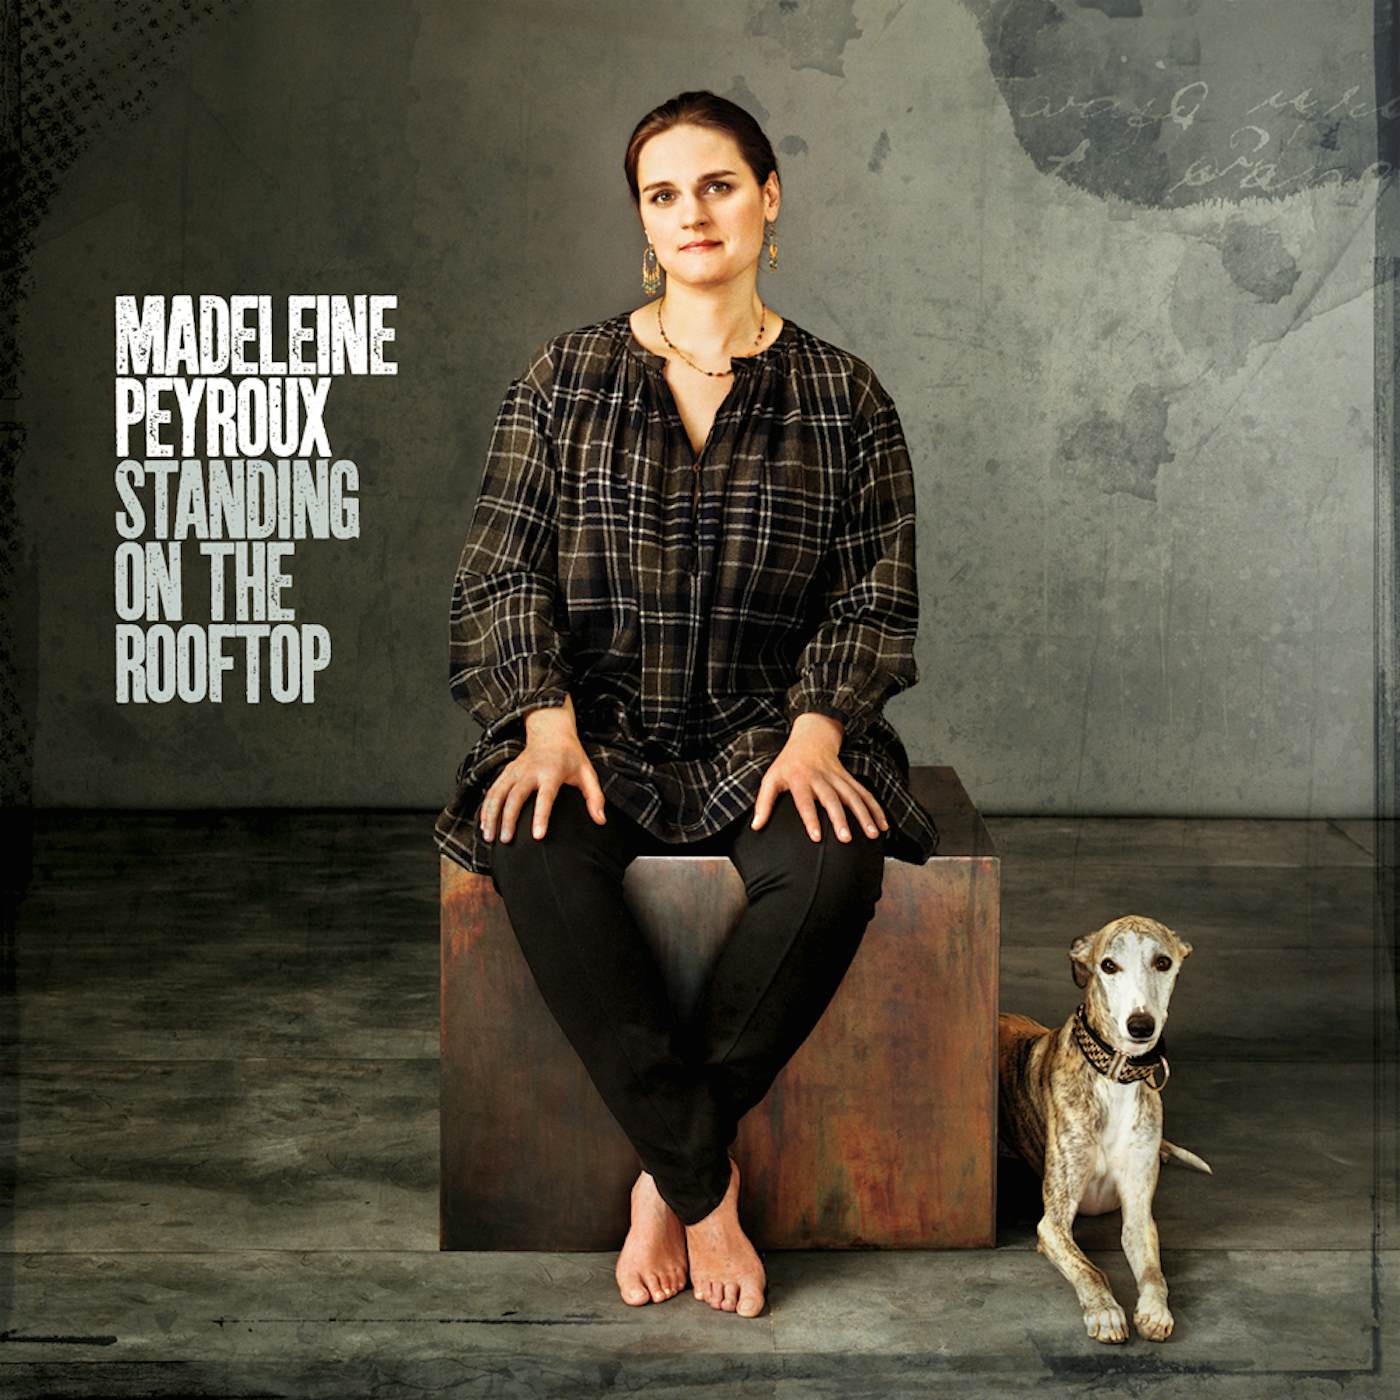 Madeleine Peyroux STANDING ON THE ROOFTOP CD